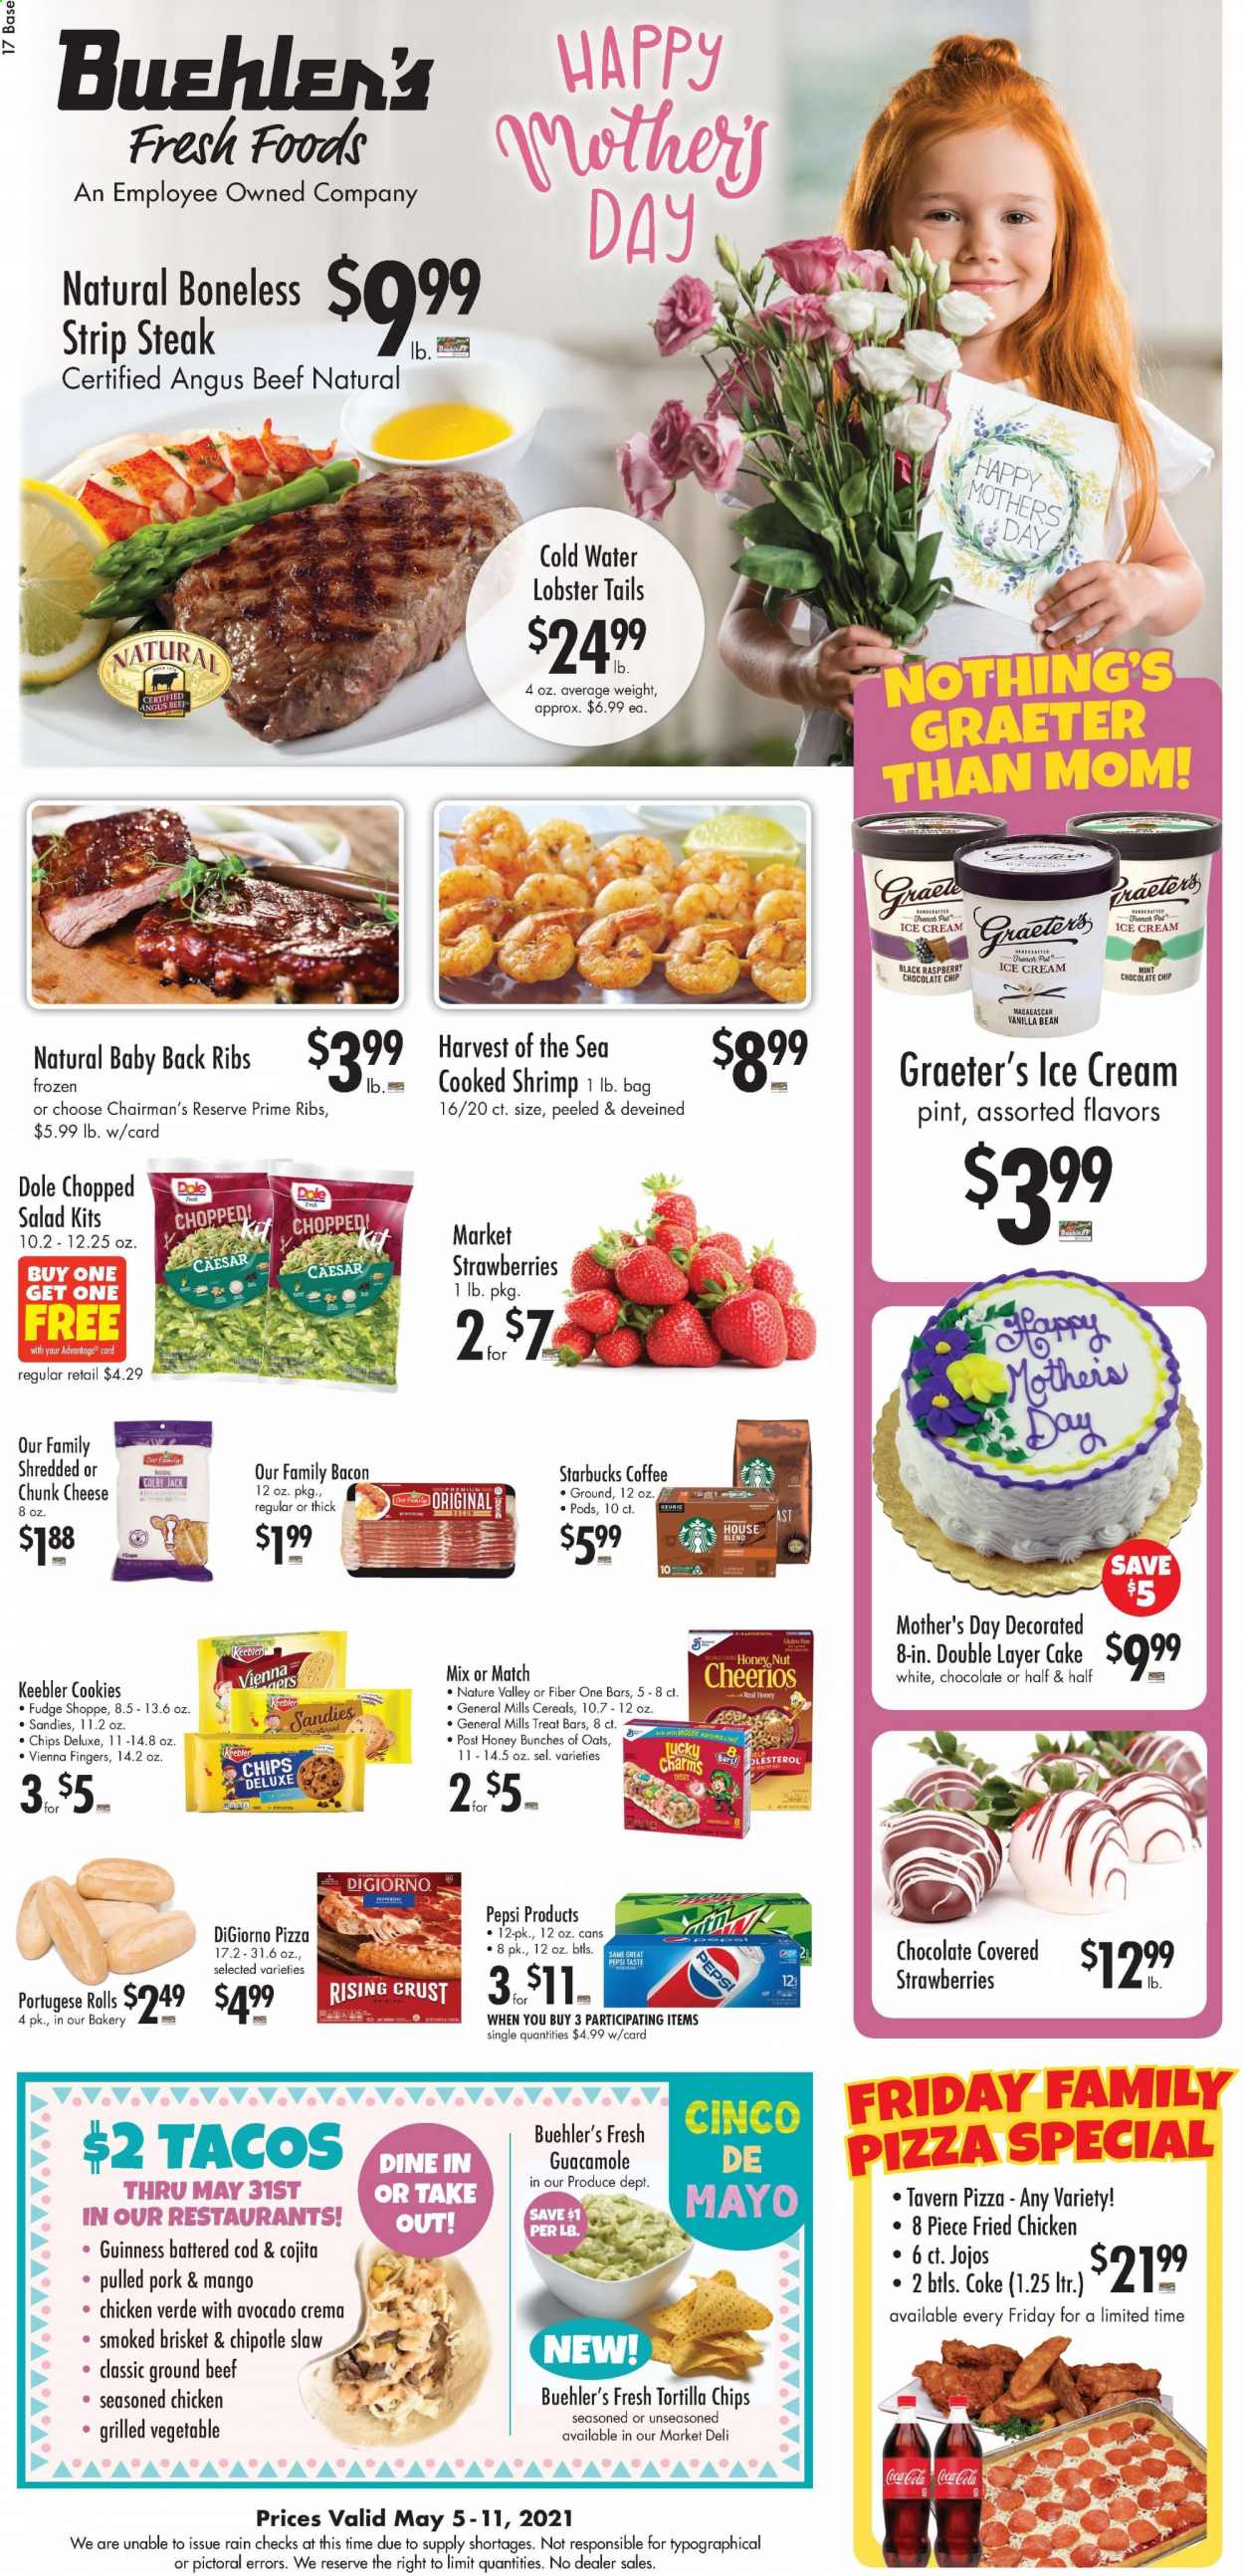 thumbnail - Buehler's Flyer - 05/05/2021 - 05/11/2021 - Sales products - tacos, salad, Dole, chopped salad, strawberries, cod, lobster, lobster tail, shrimps, pizza, fried chicken, pulled pork, bacon, pepperoni, guacamole, Colby cheese, chunk cheese, mayonnaise, ice cream, cookies, fudge, vienna fingers, Keebler, tortilla chips, cereals, Cheerios, Nature Valley, Fiber One, Coca-Cola, Pepsi, coffee, Starbucks, Keurig, Guinness, beef meat, ground beef, steak, striploin steak, pork meat, pork ribs, pork back ribs, bunches, Half and half. Page 1.